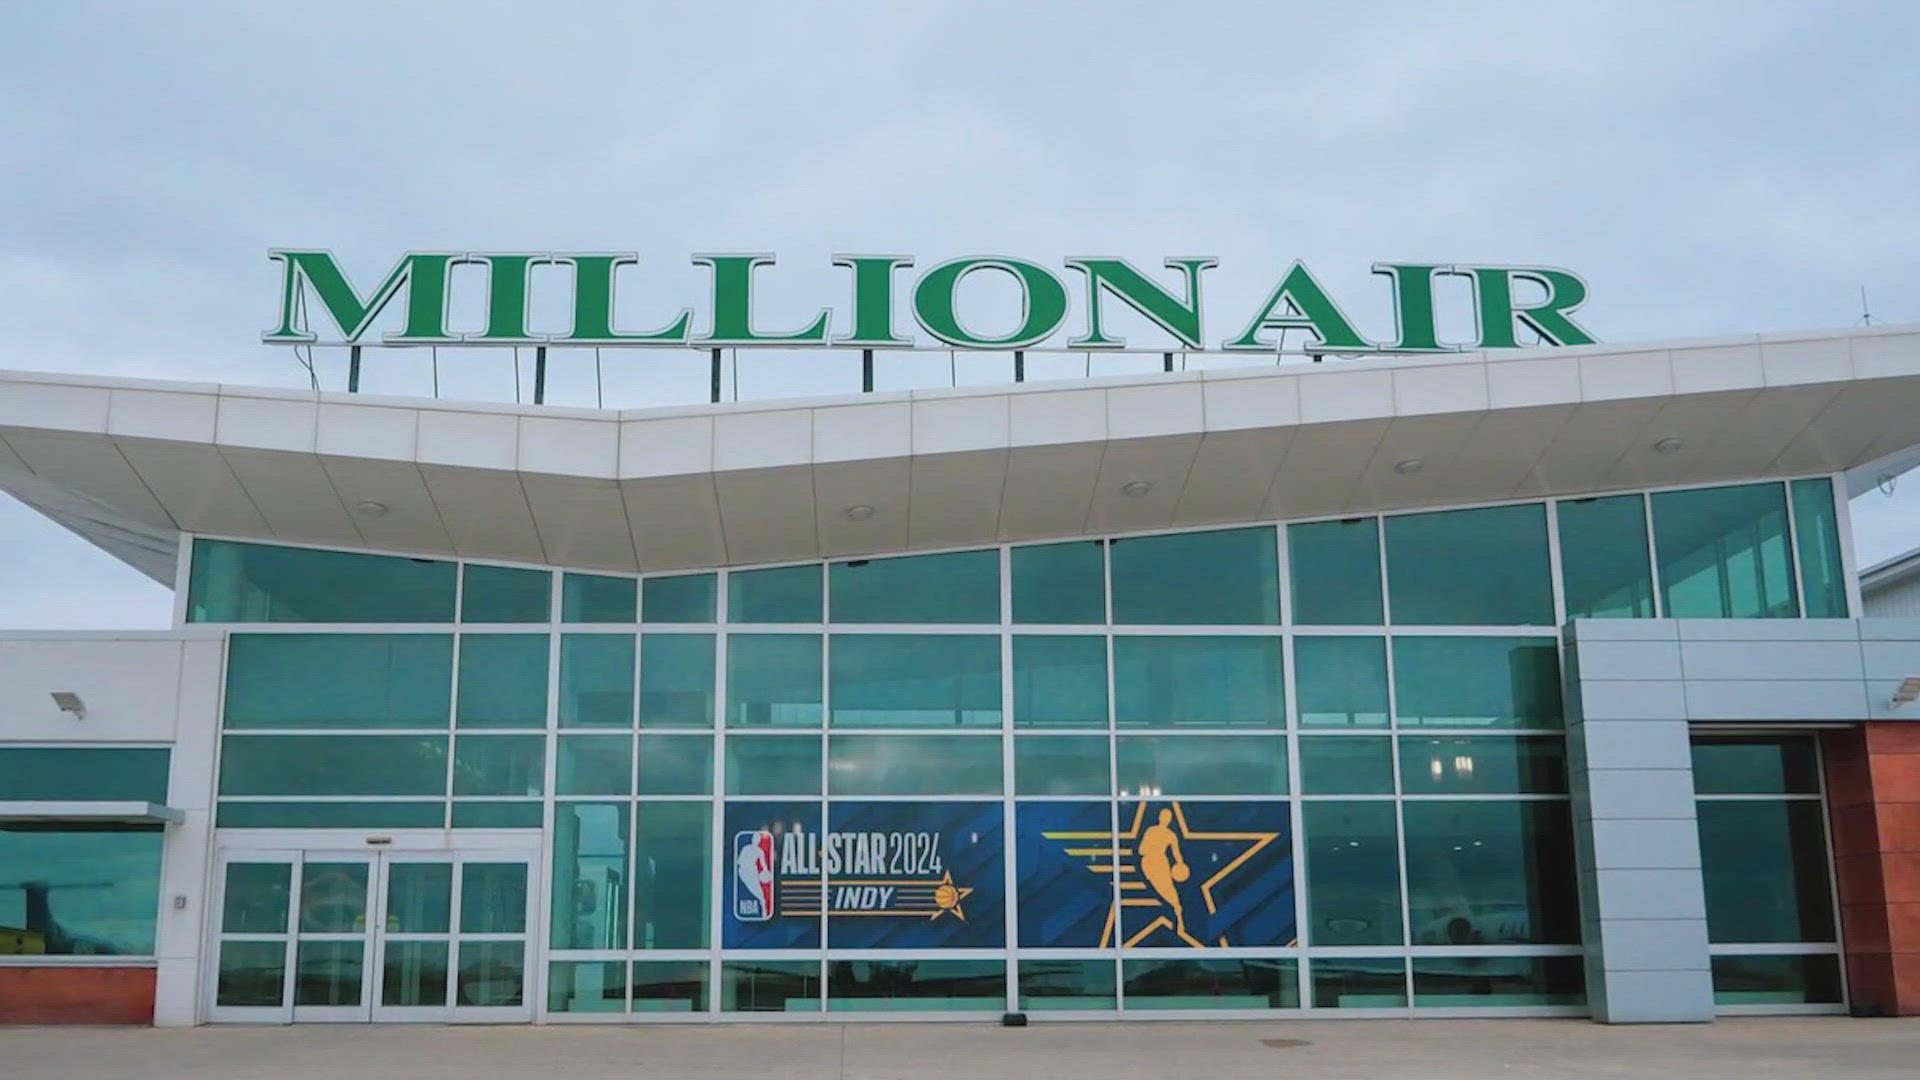 At least 100 private jets are expected to fly into Indianapolis ahead of NBA All-Star weekend festivities.